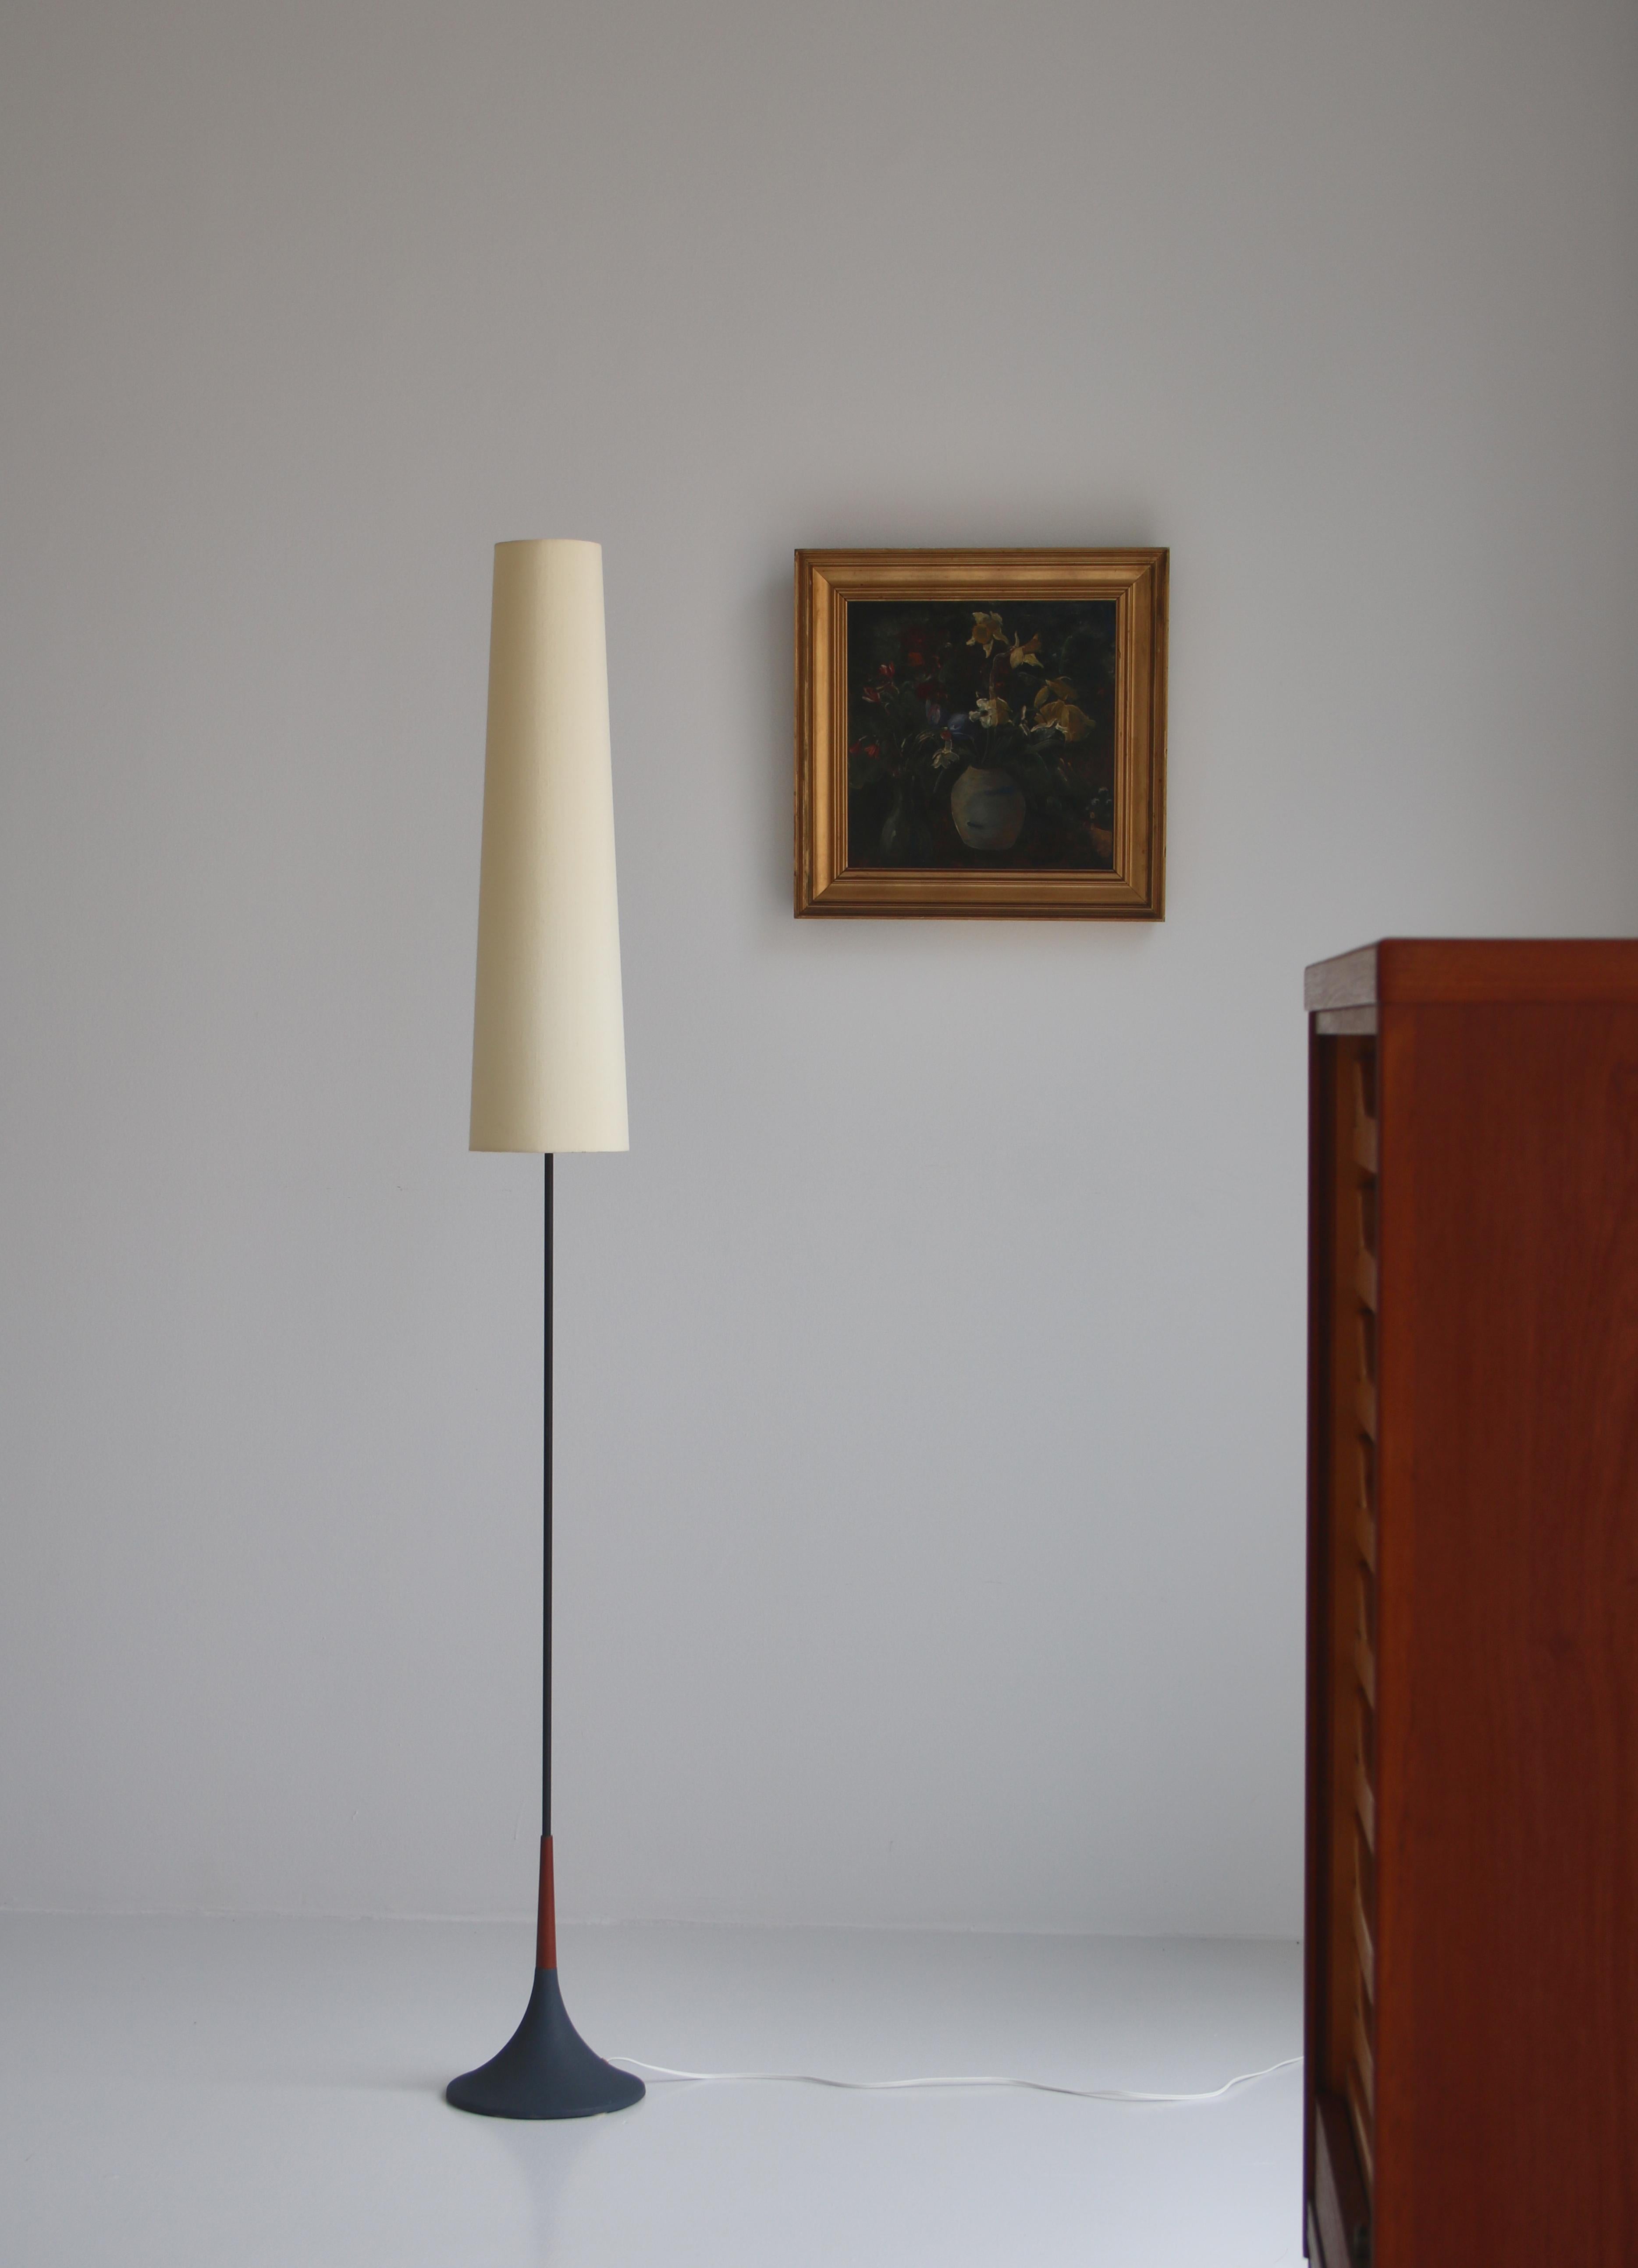 Floor lamp from the 1960s in conical shape. Design by Svend Aage Holm Sørensen and made at his own workshop. Original white linen shade in amazing condition. The base and stem is made from cast iron and teakwood.